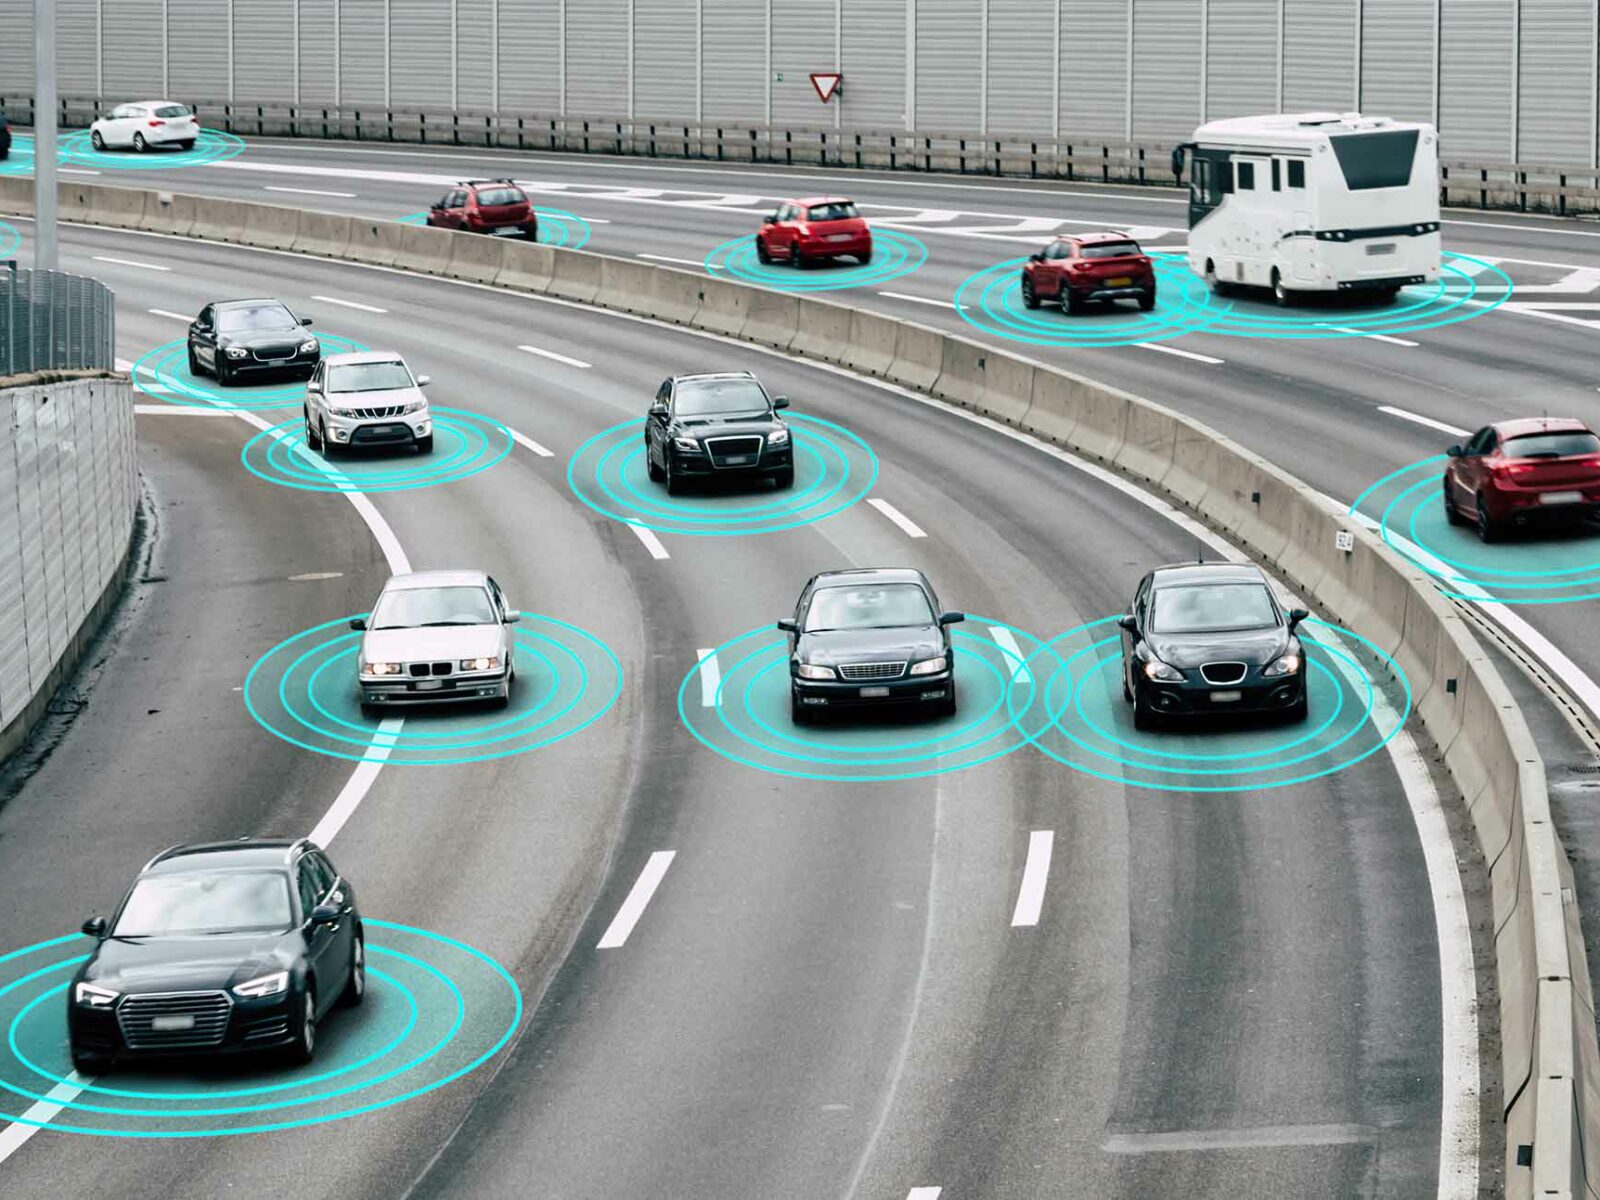 Machine Learning and AI in Autonomous Vehicles